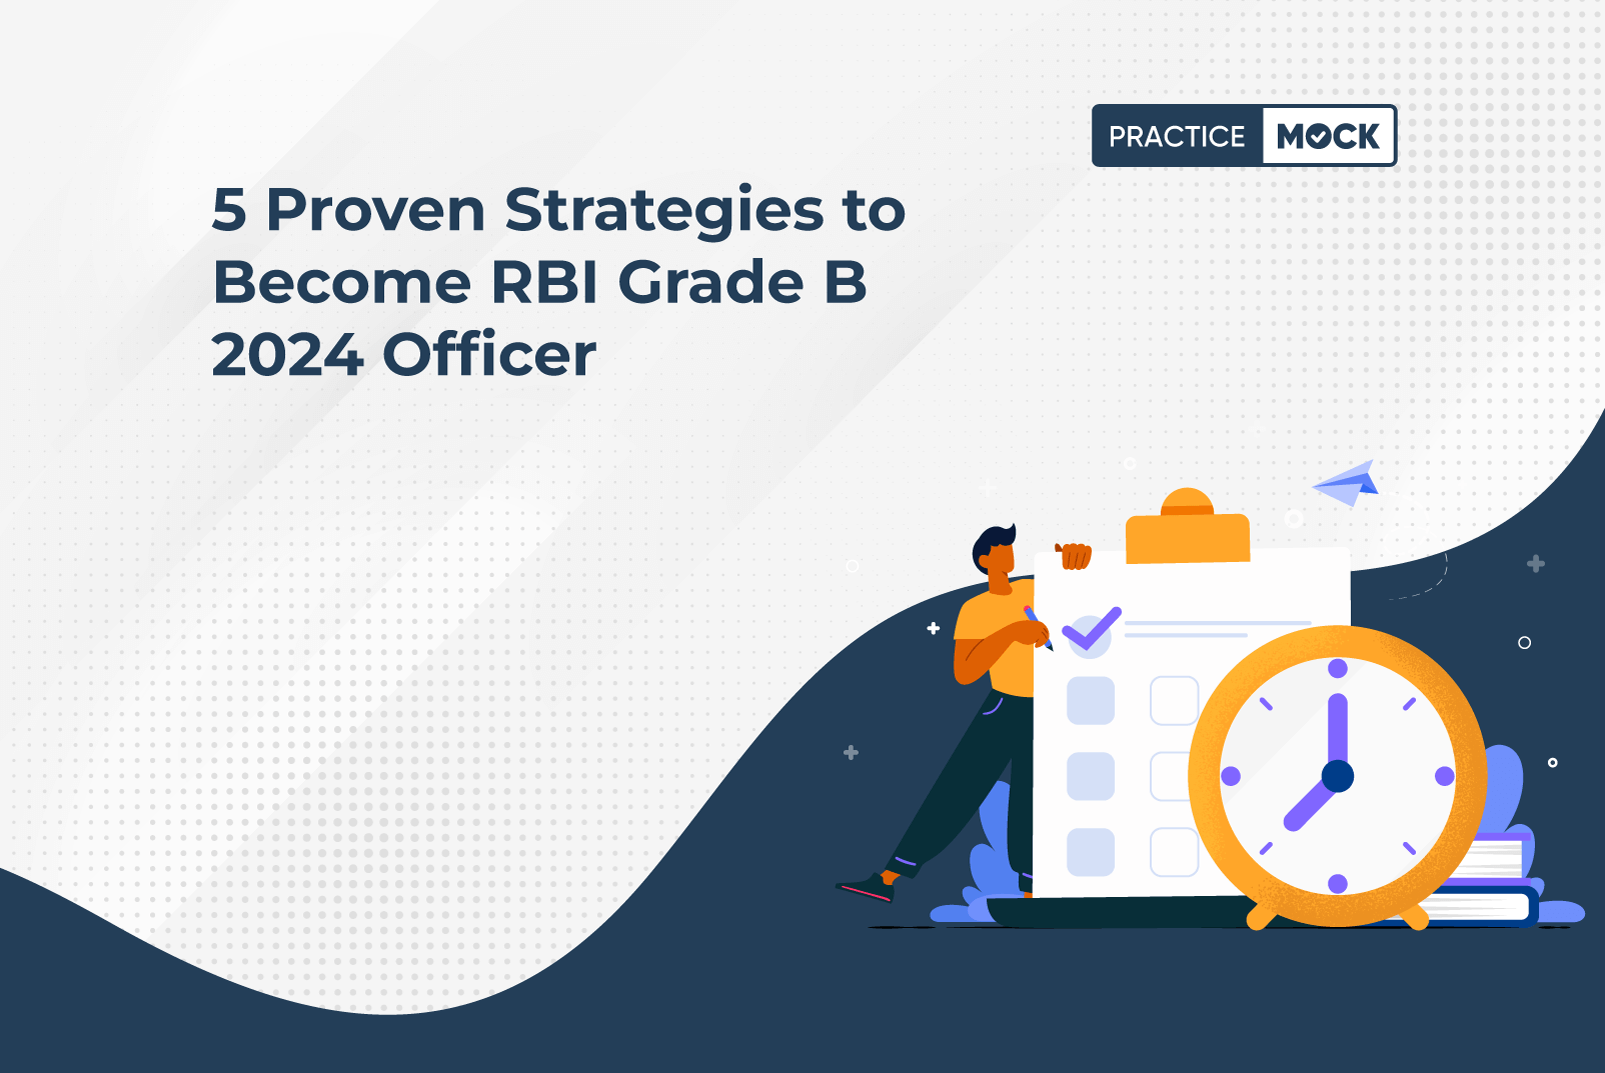 5 Proven Strategies to Become RBI Grade B 2024 Officer